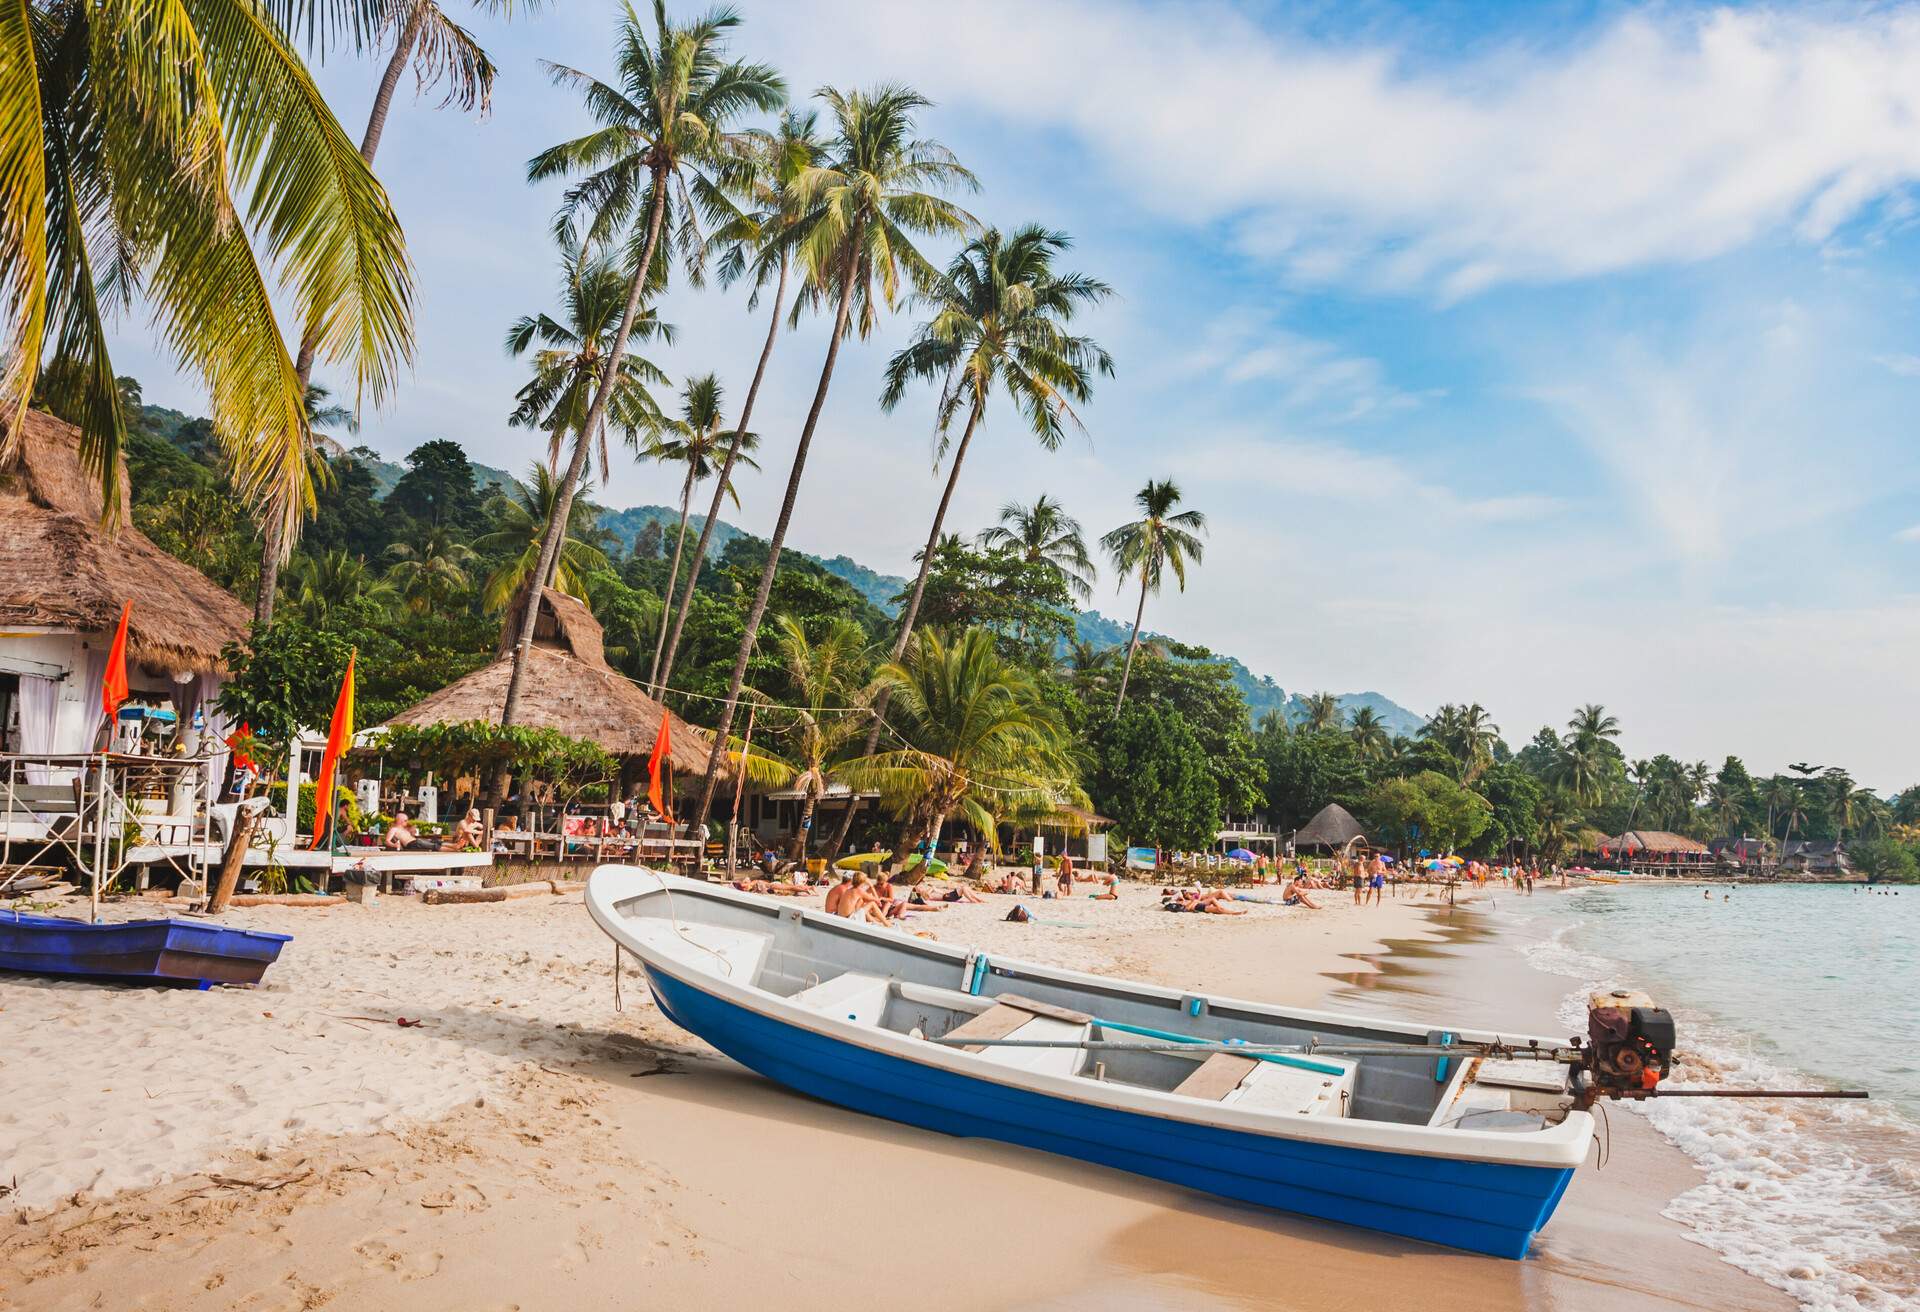 A small boat on the shore lined with straw-roofed houses and tall palm trees by the sea.